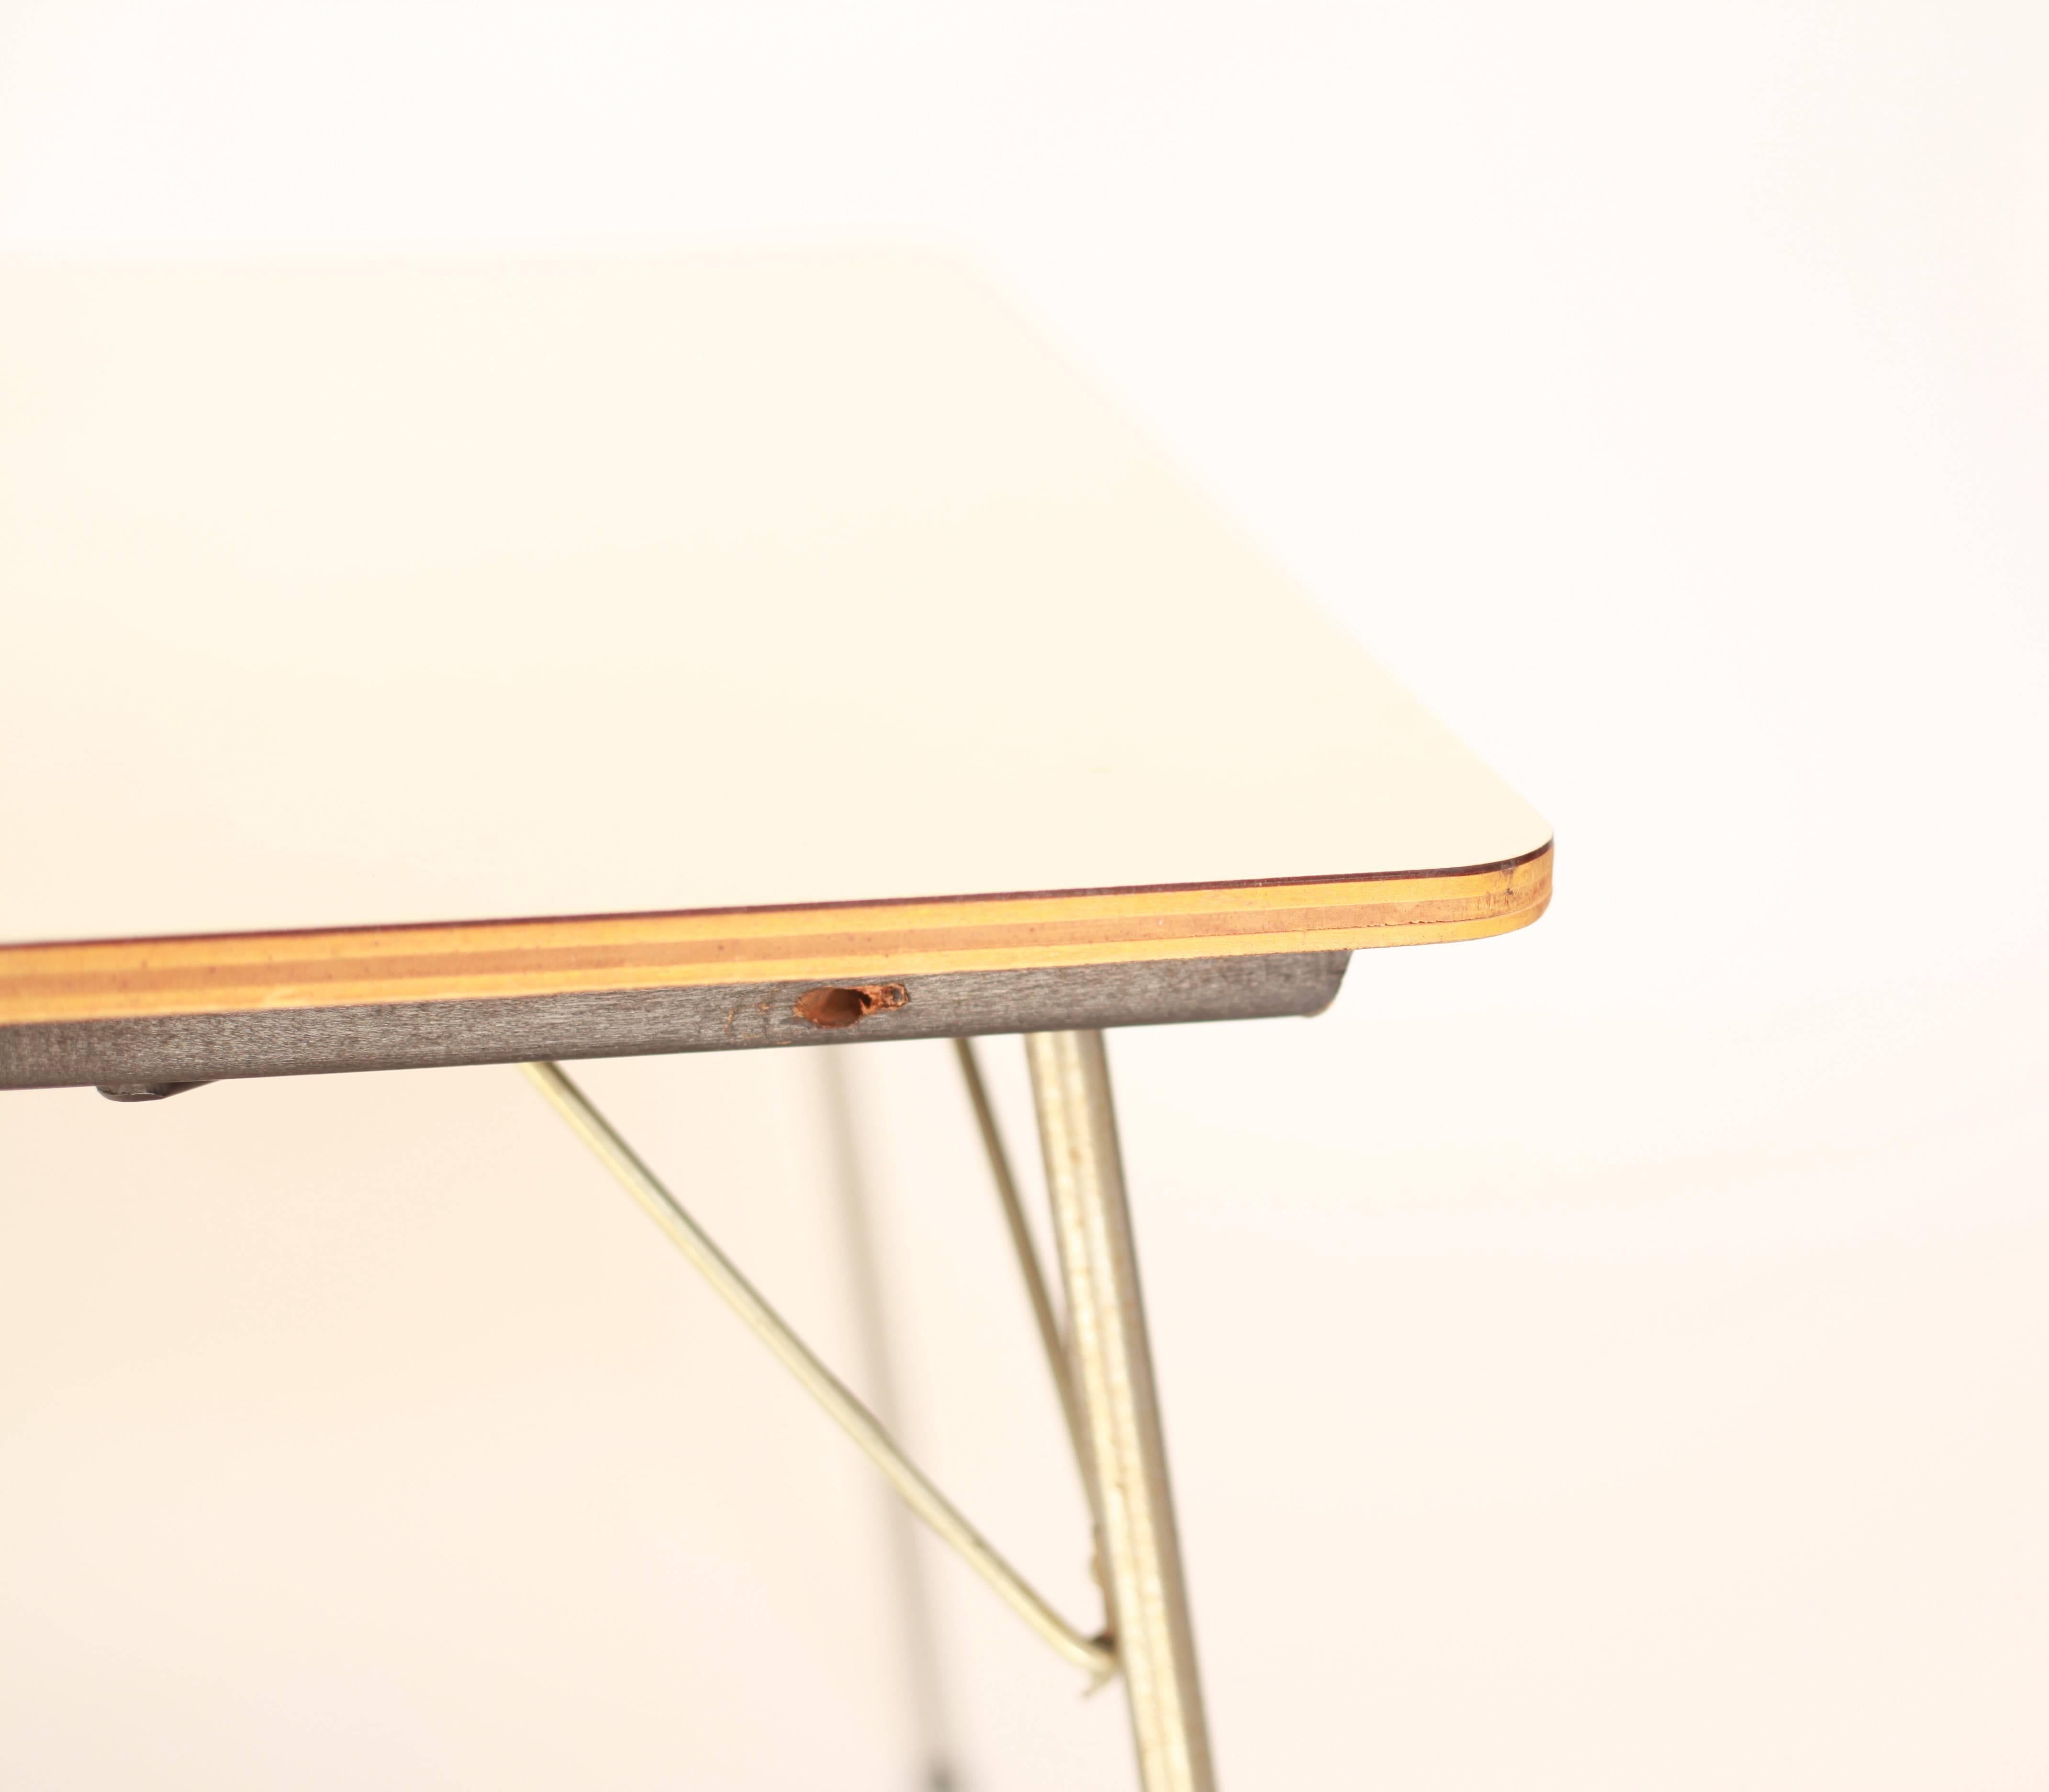 This early rare Eames IT-1 table features unique hardware which hold the leg braces on. This hardware is unseen on other production tables. Production models have holes drilled into the wood and the leg braces fit into these holes. This model